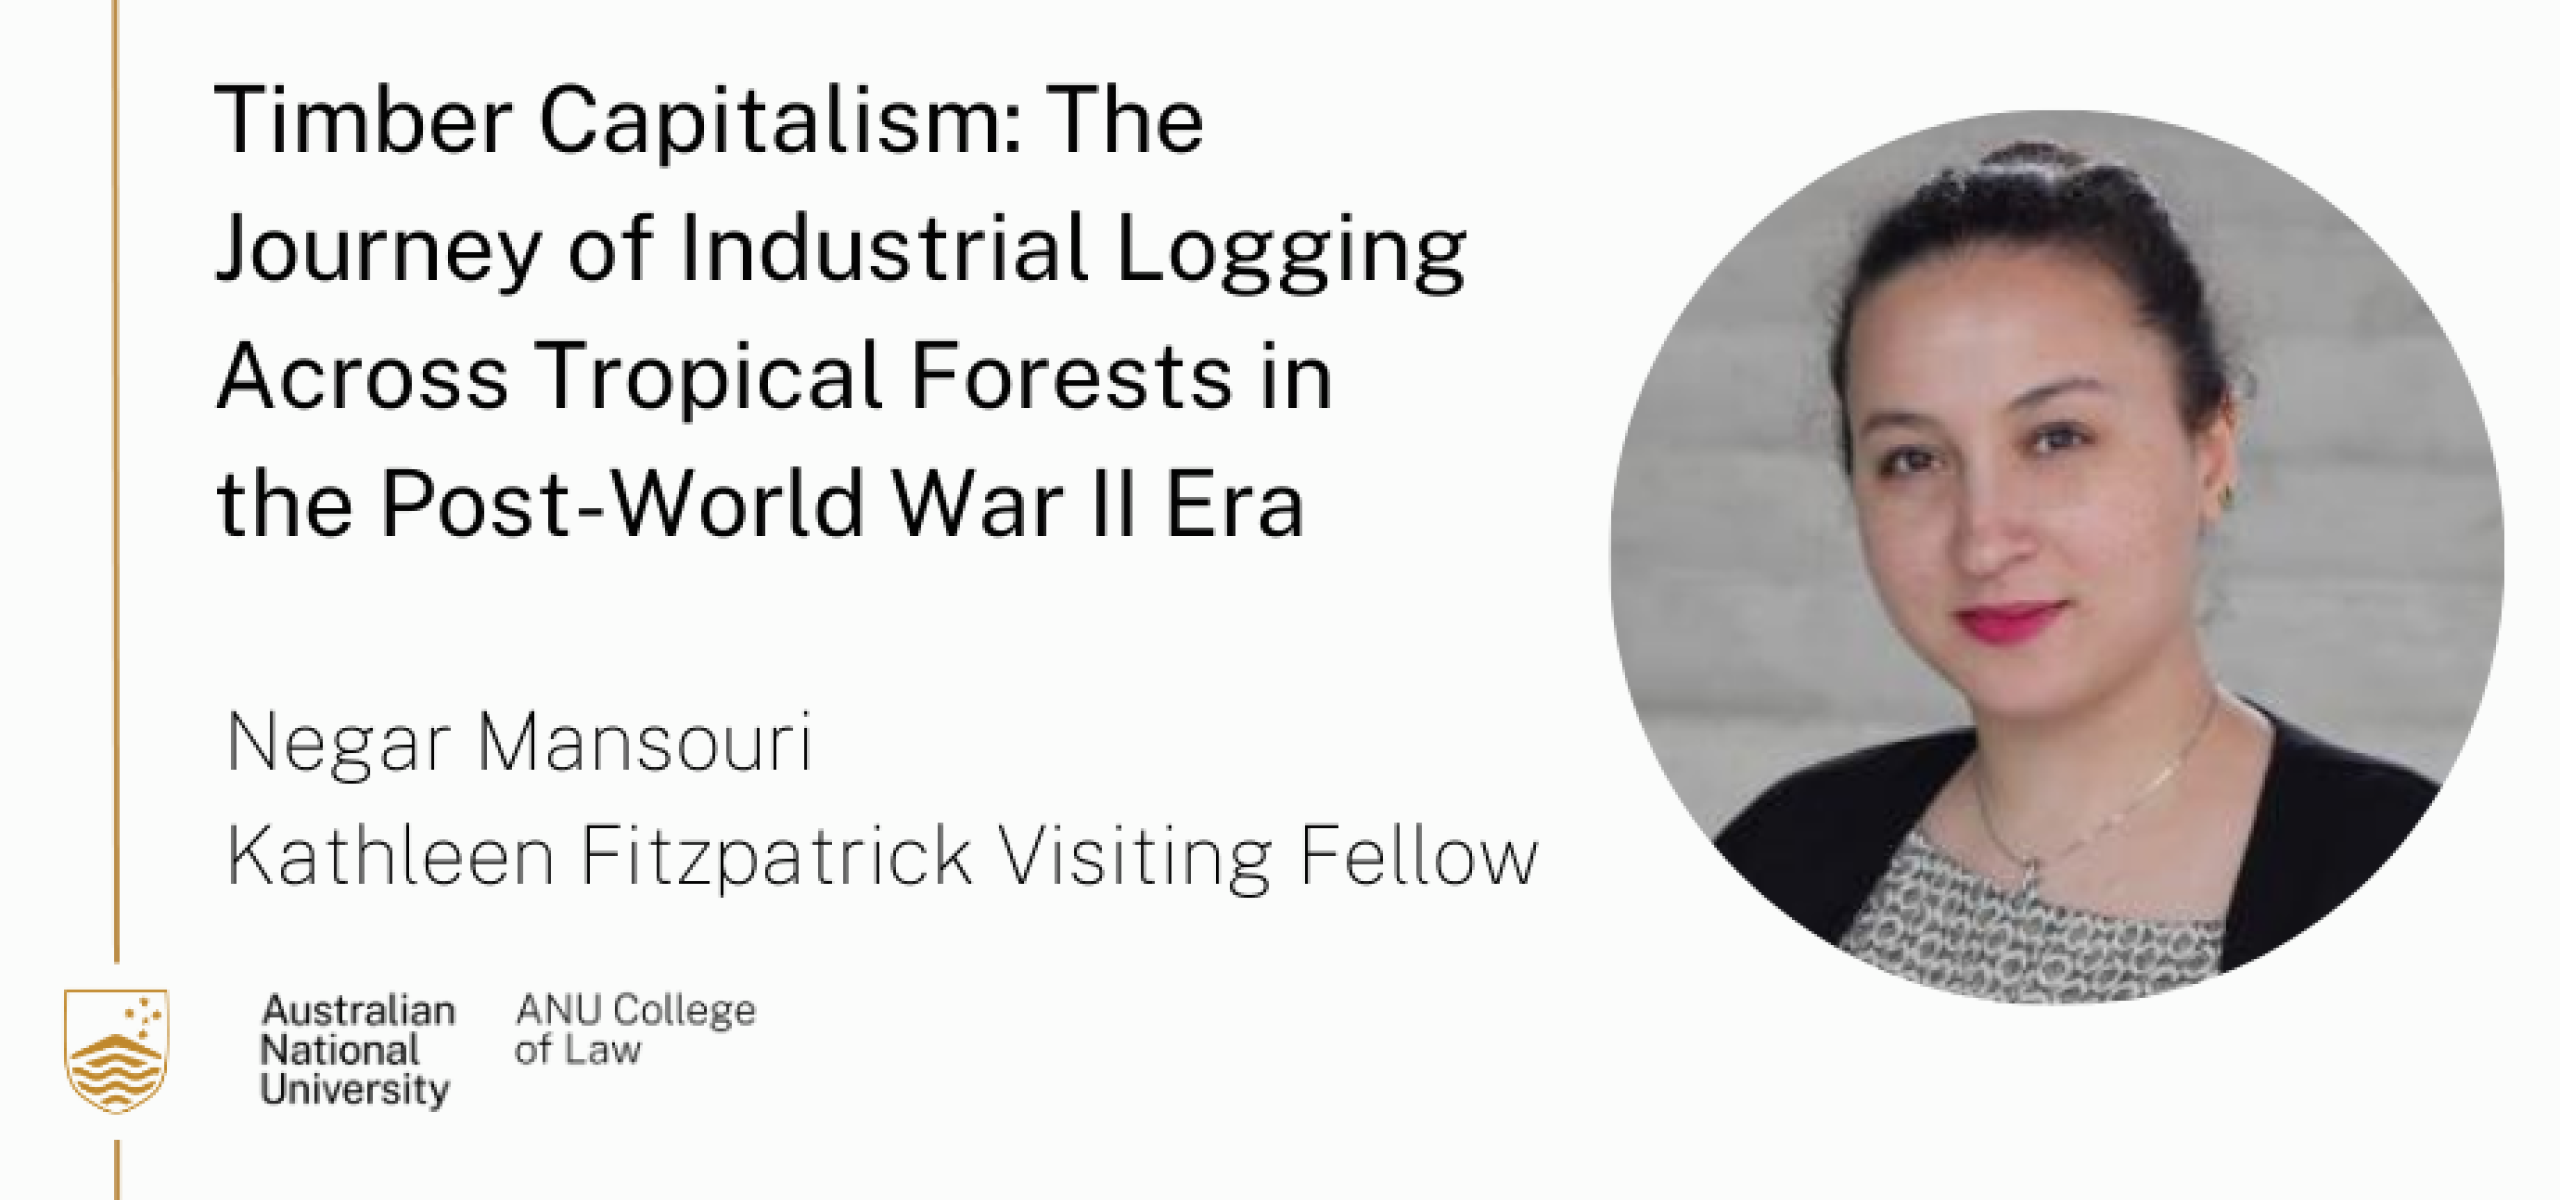 Timber Capitalism: The Journey of Industrial Logging Across Tropical Forests in the Post-World War II Era